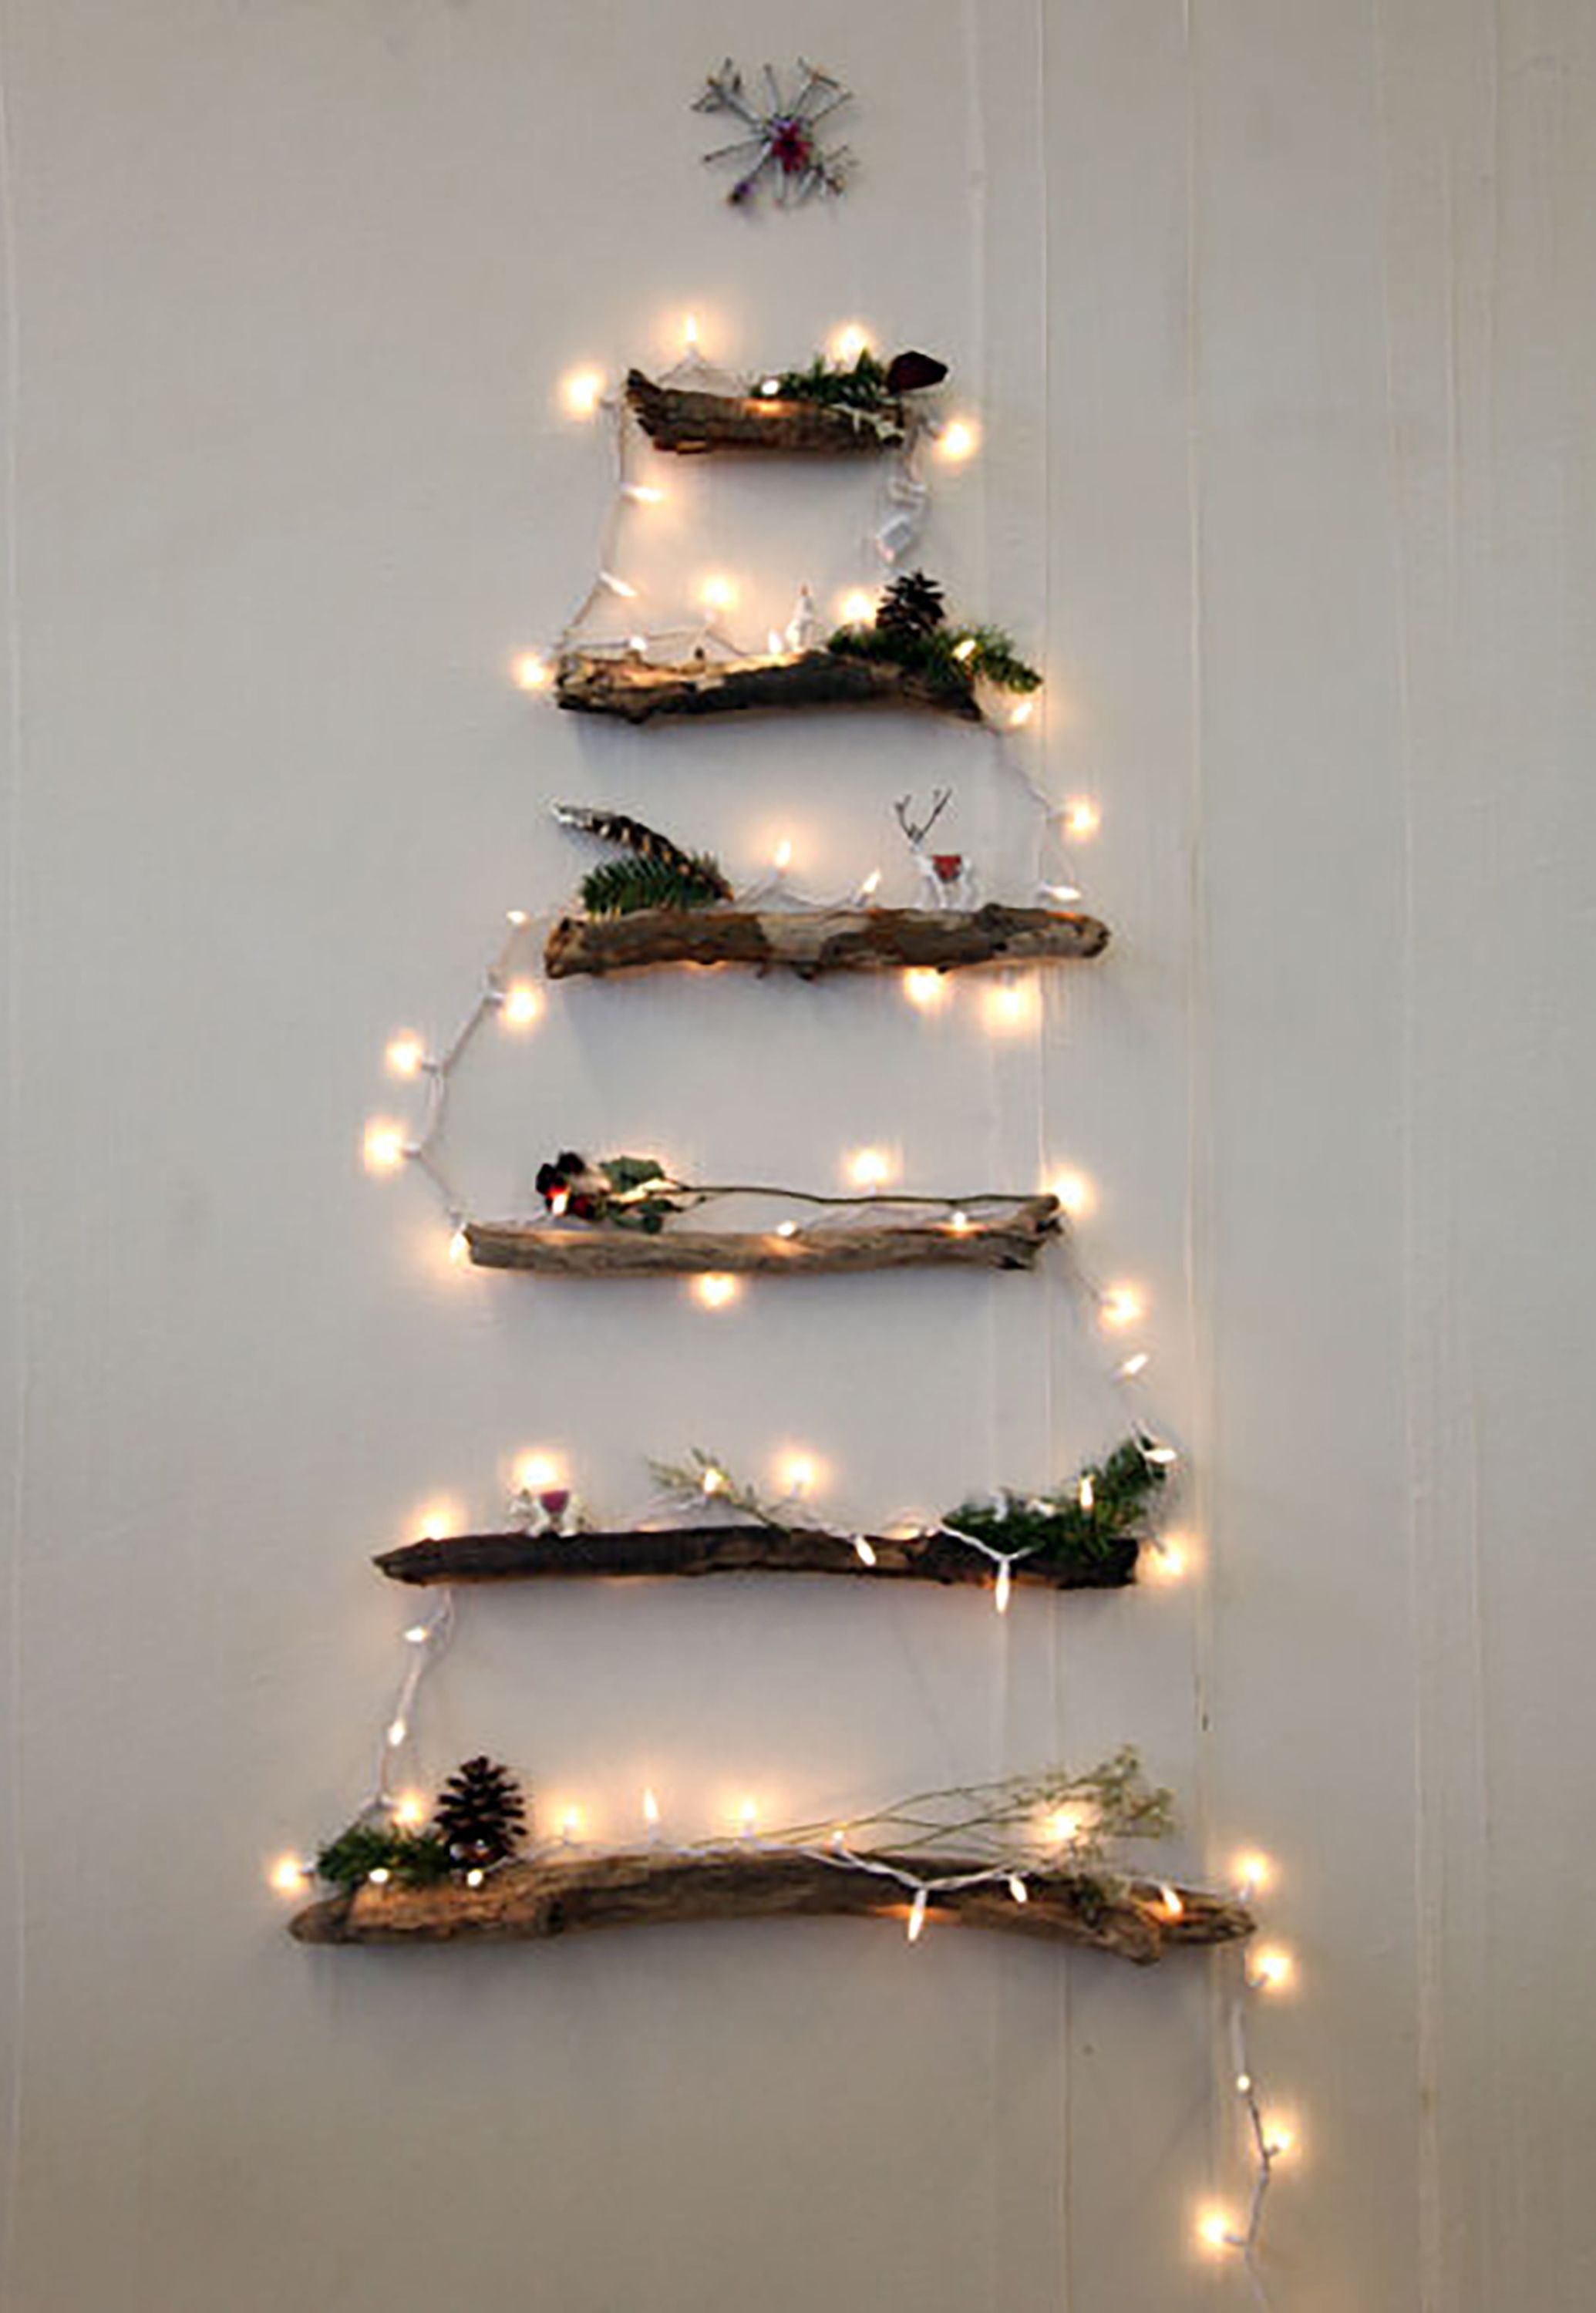 19 Decorating Ideas for Christmas Lights - LED Lights Decorations